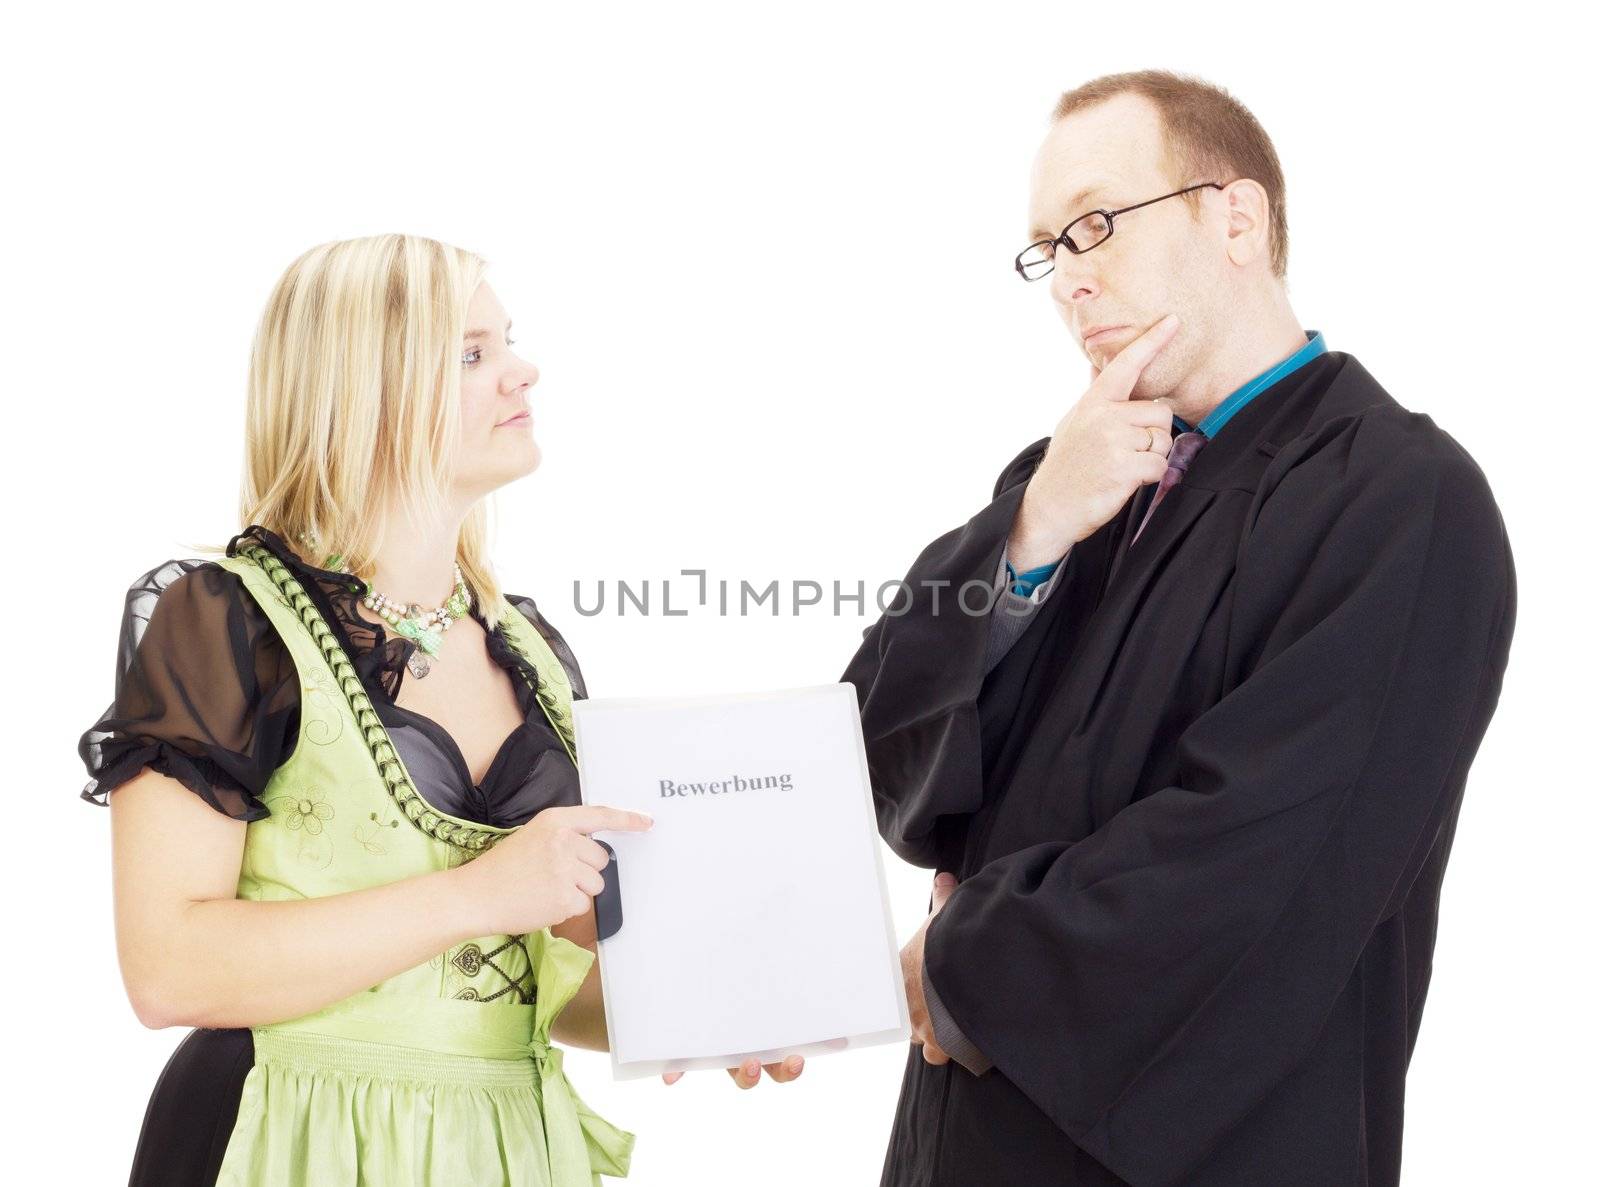 A staff executive interviews a young woman